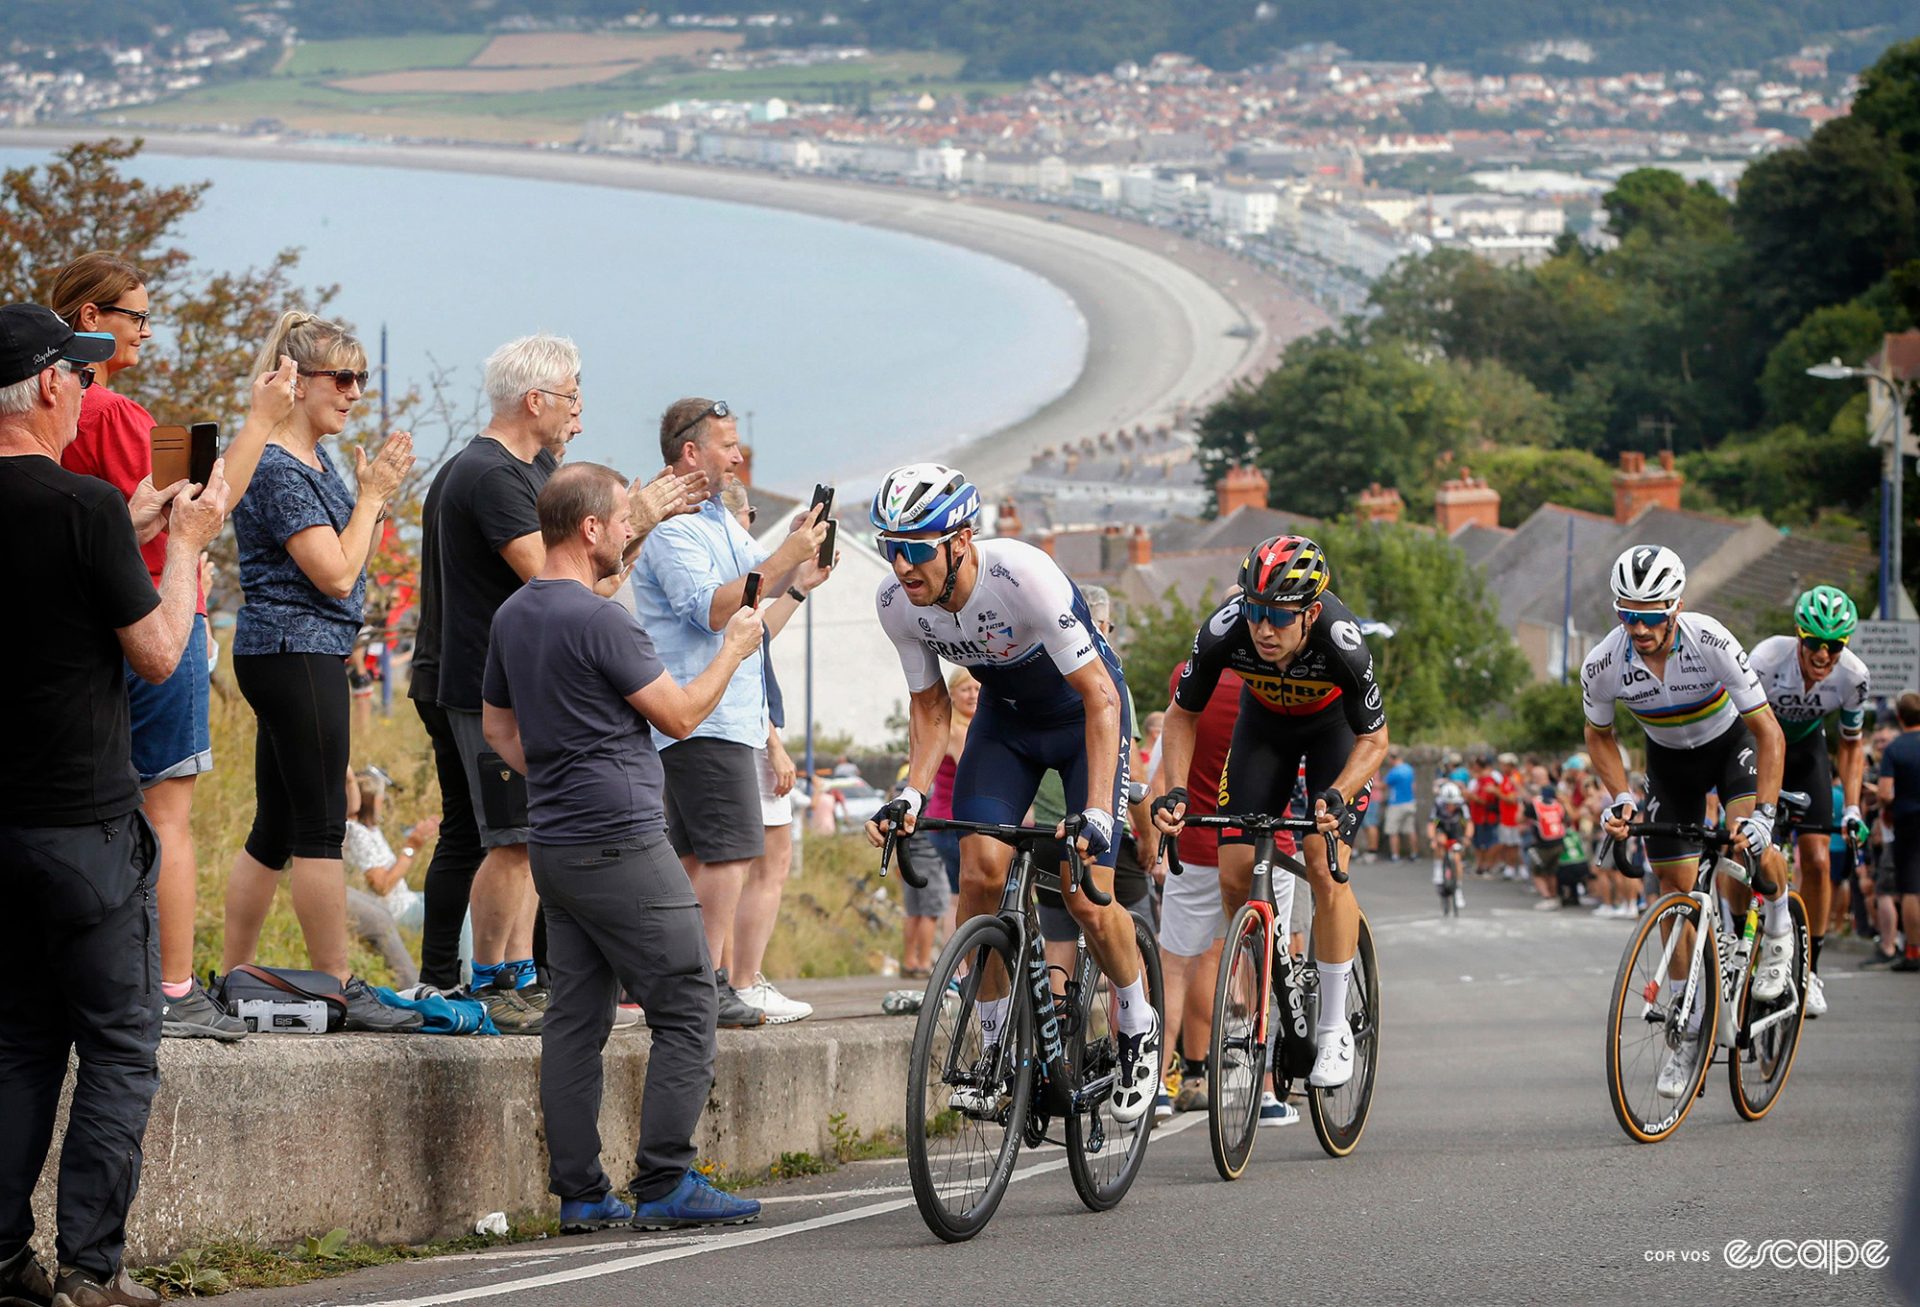 Michael Woods, Wout van Aert and Julian Alaphilippe tackle the Great Orme in 2021. The three are shown high on the climb, looking down on a curved beachfront and city behind.